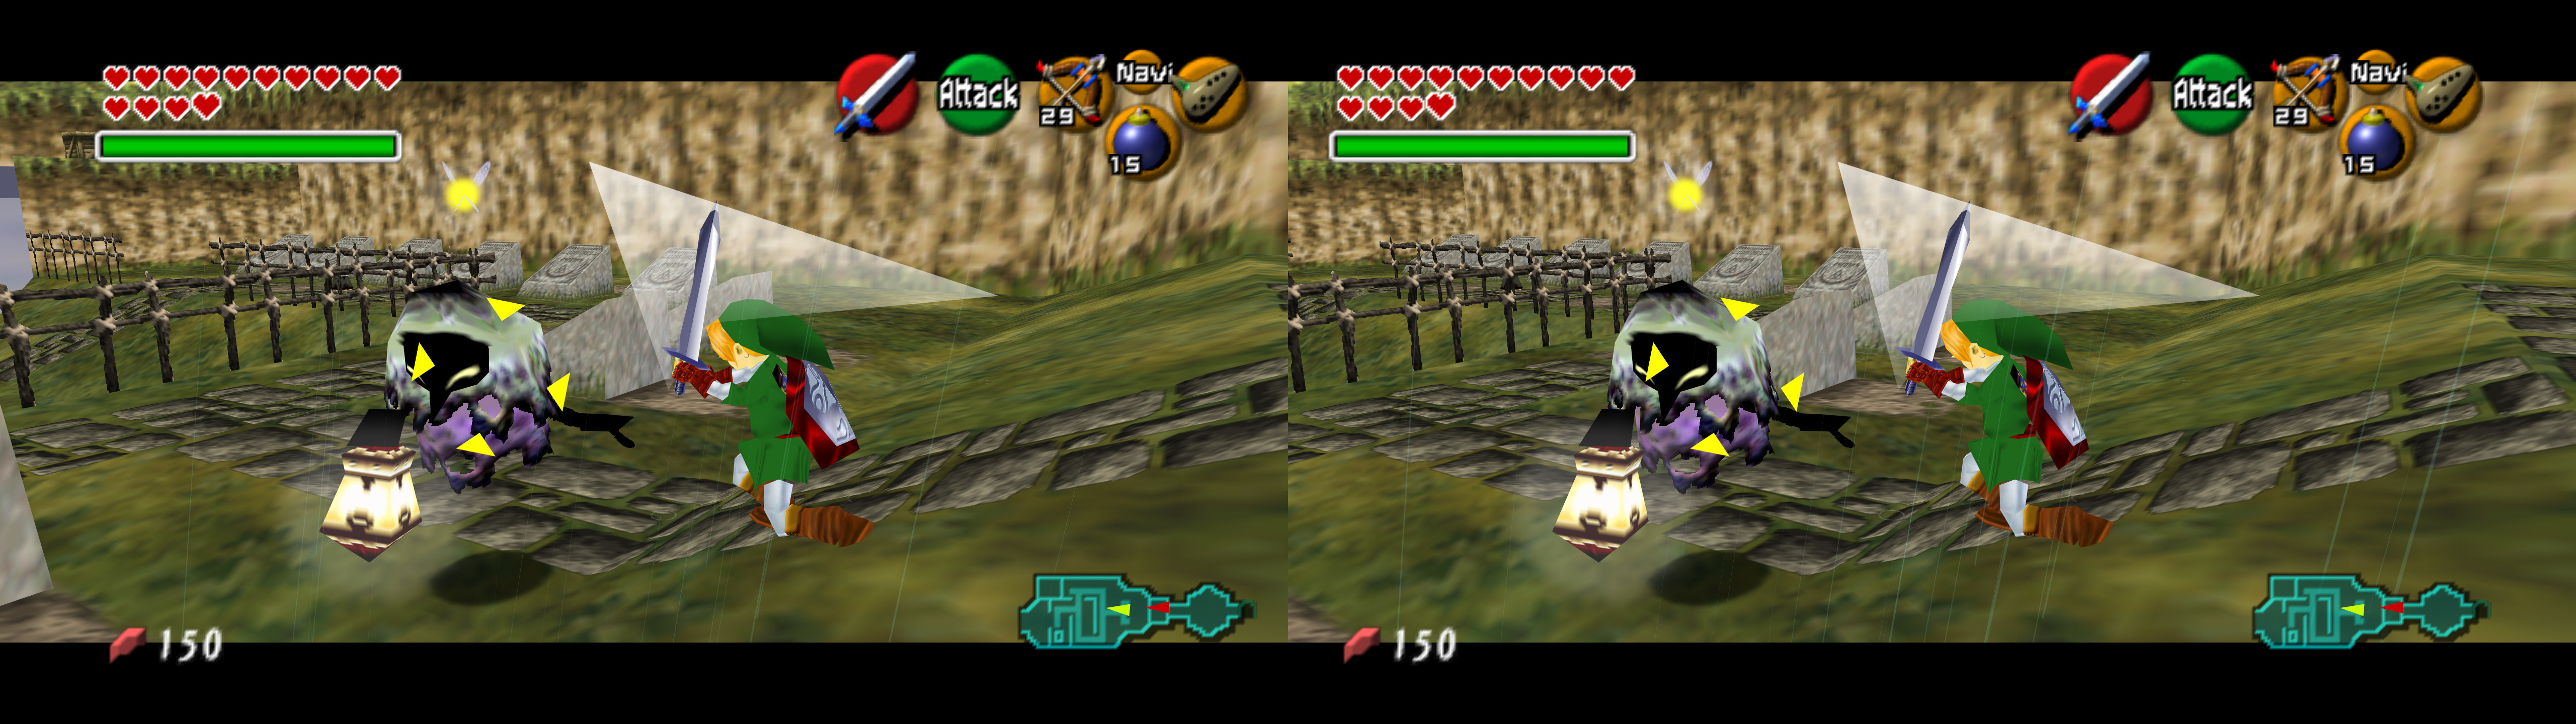 Let's Check Out Ocarina Of Time's PC 'Port